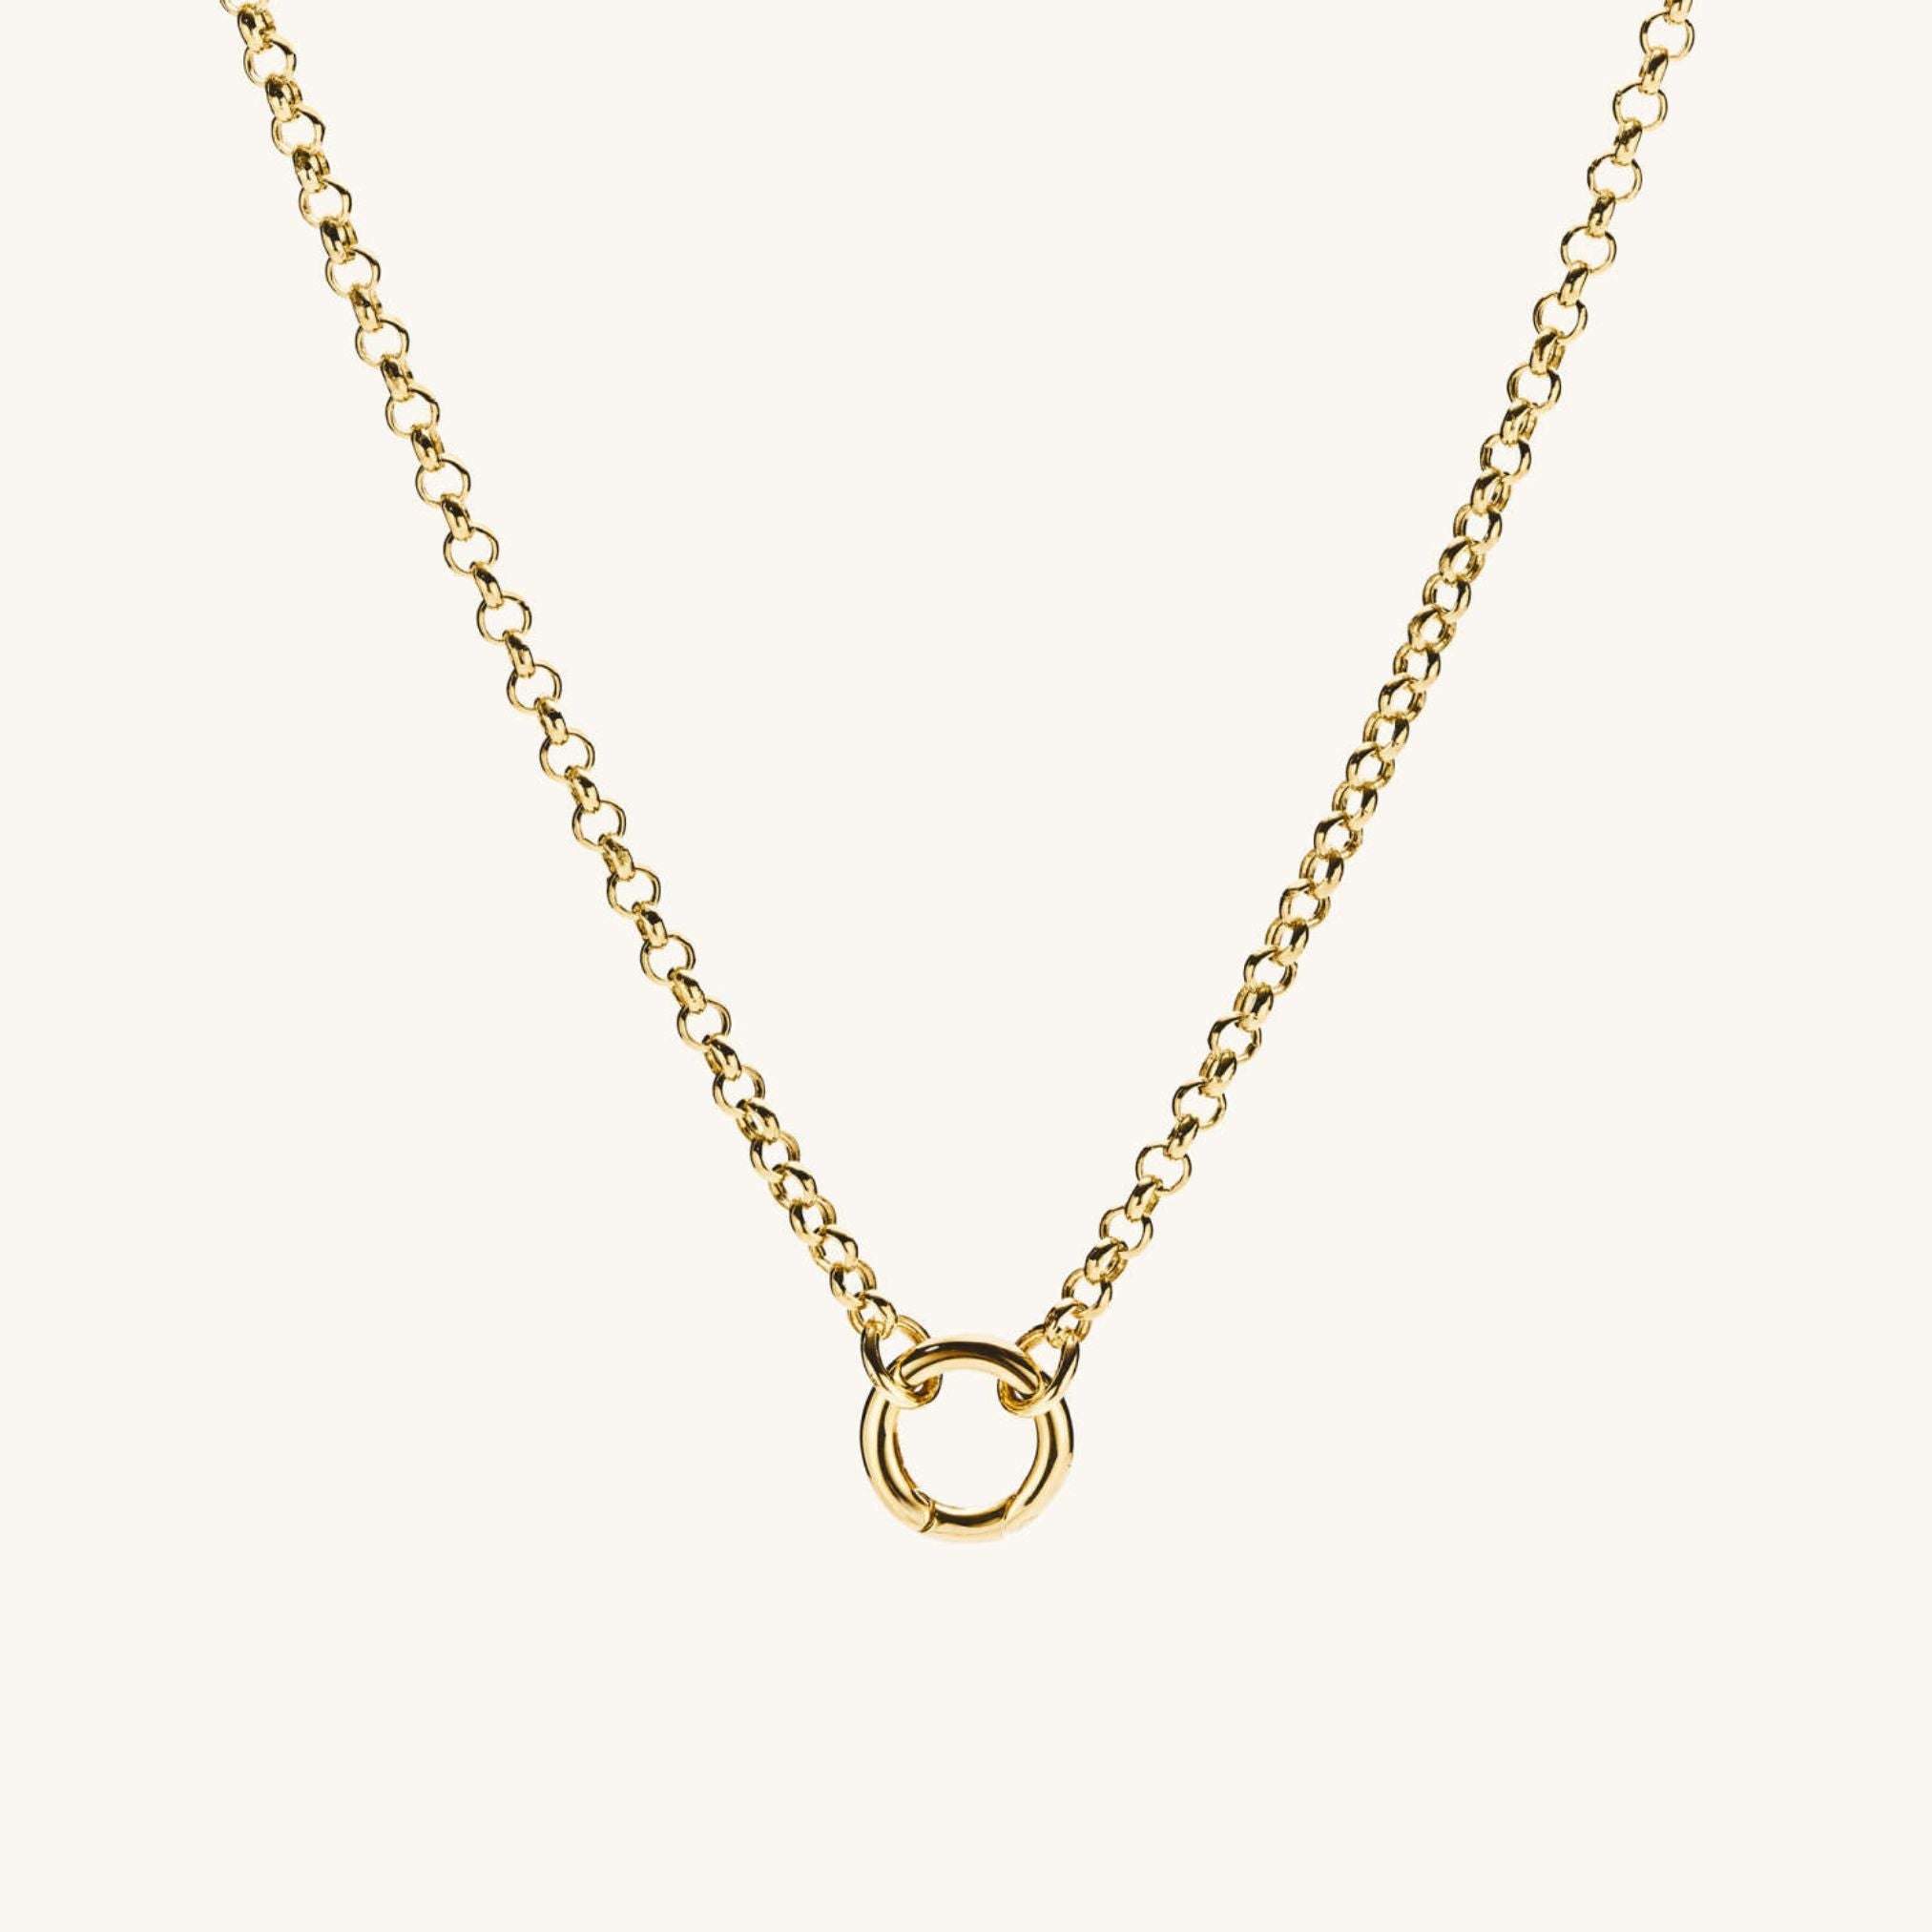 24K Gold Rolo Chain Charm Necklace